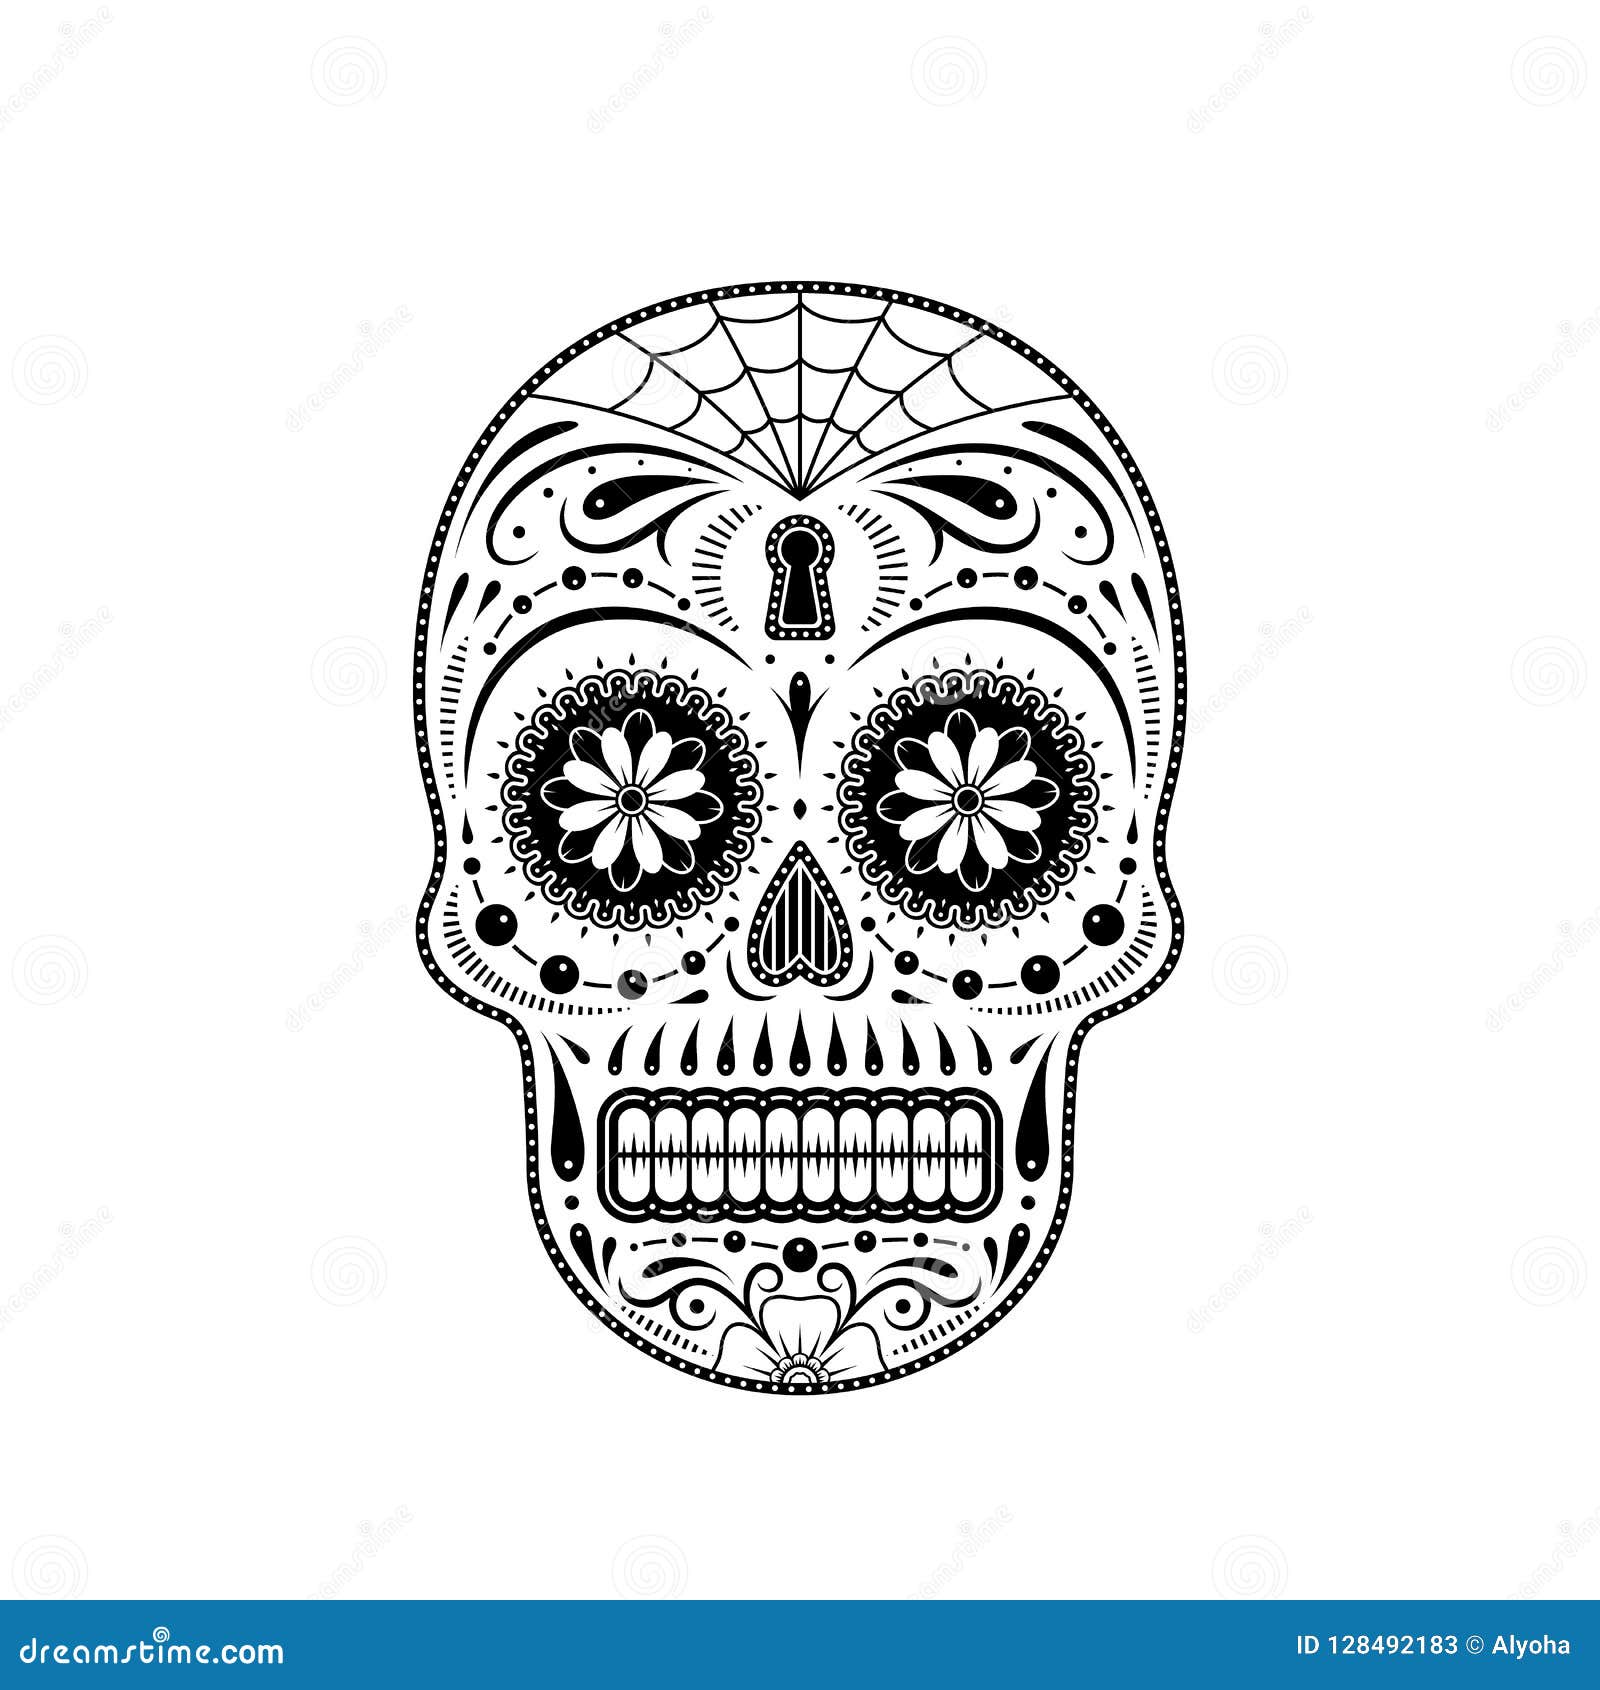 Flame And Skull Stencils Burning Tattoo Design  Just Free Image    ClipArt Best  ClipArt Best